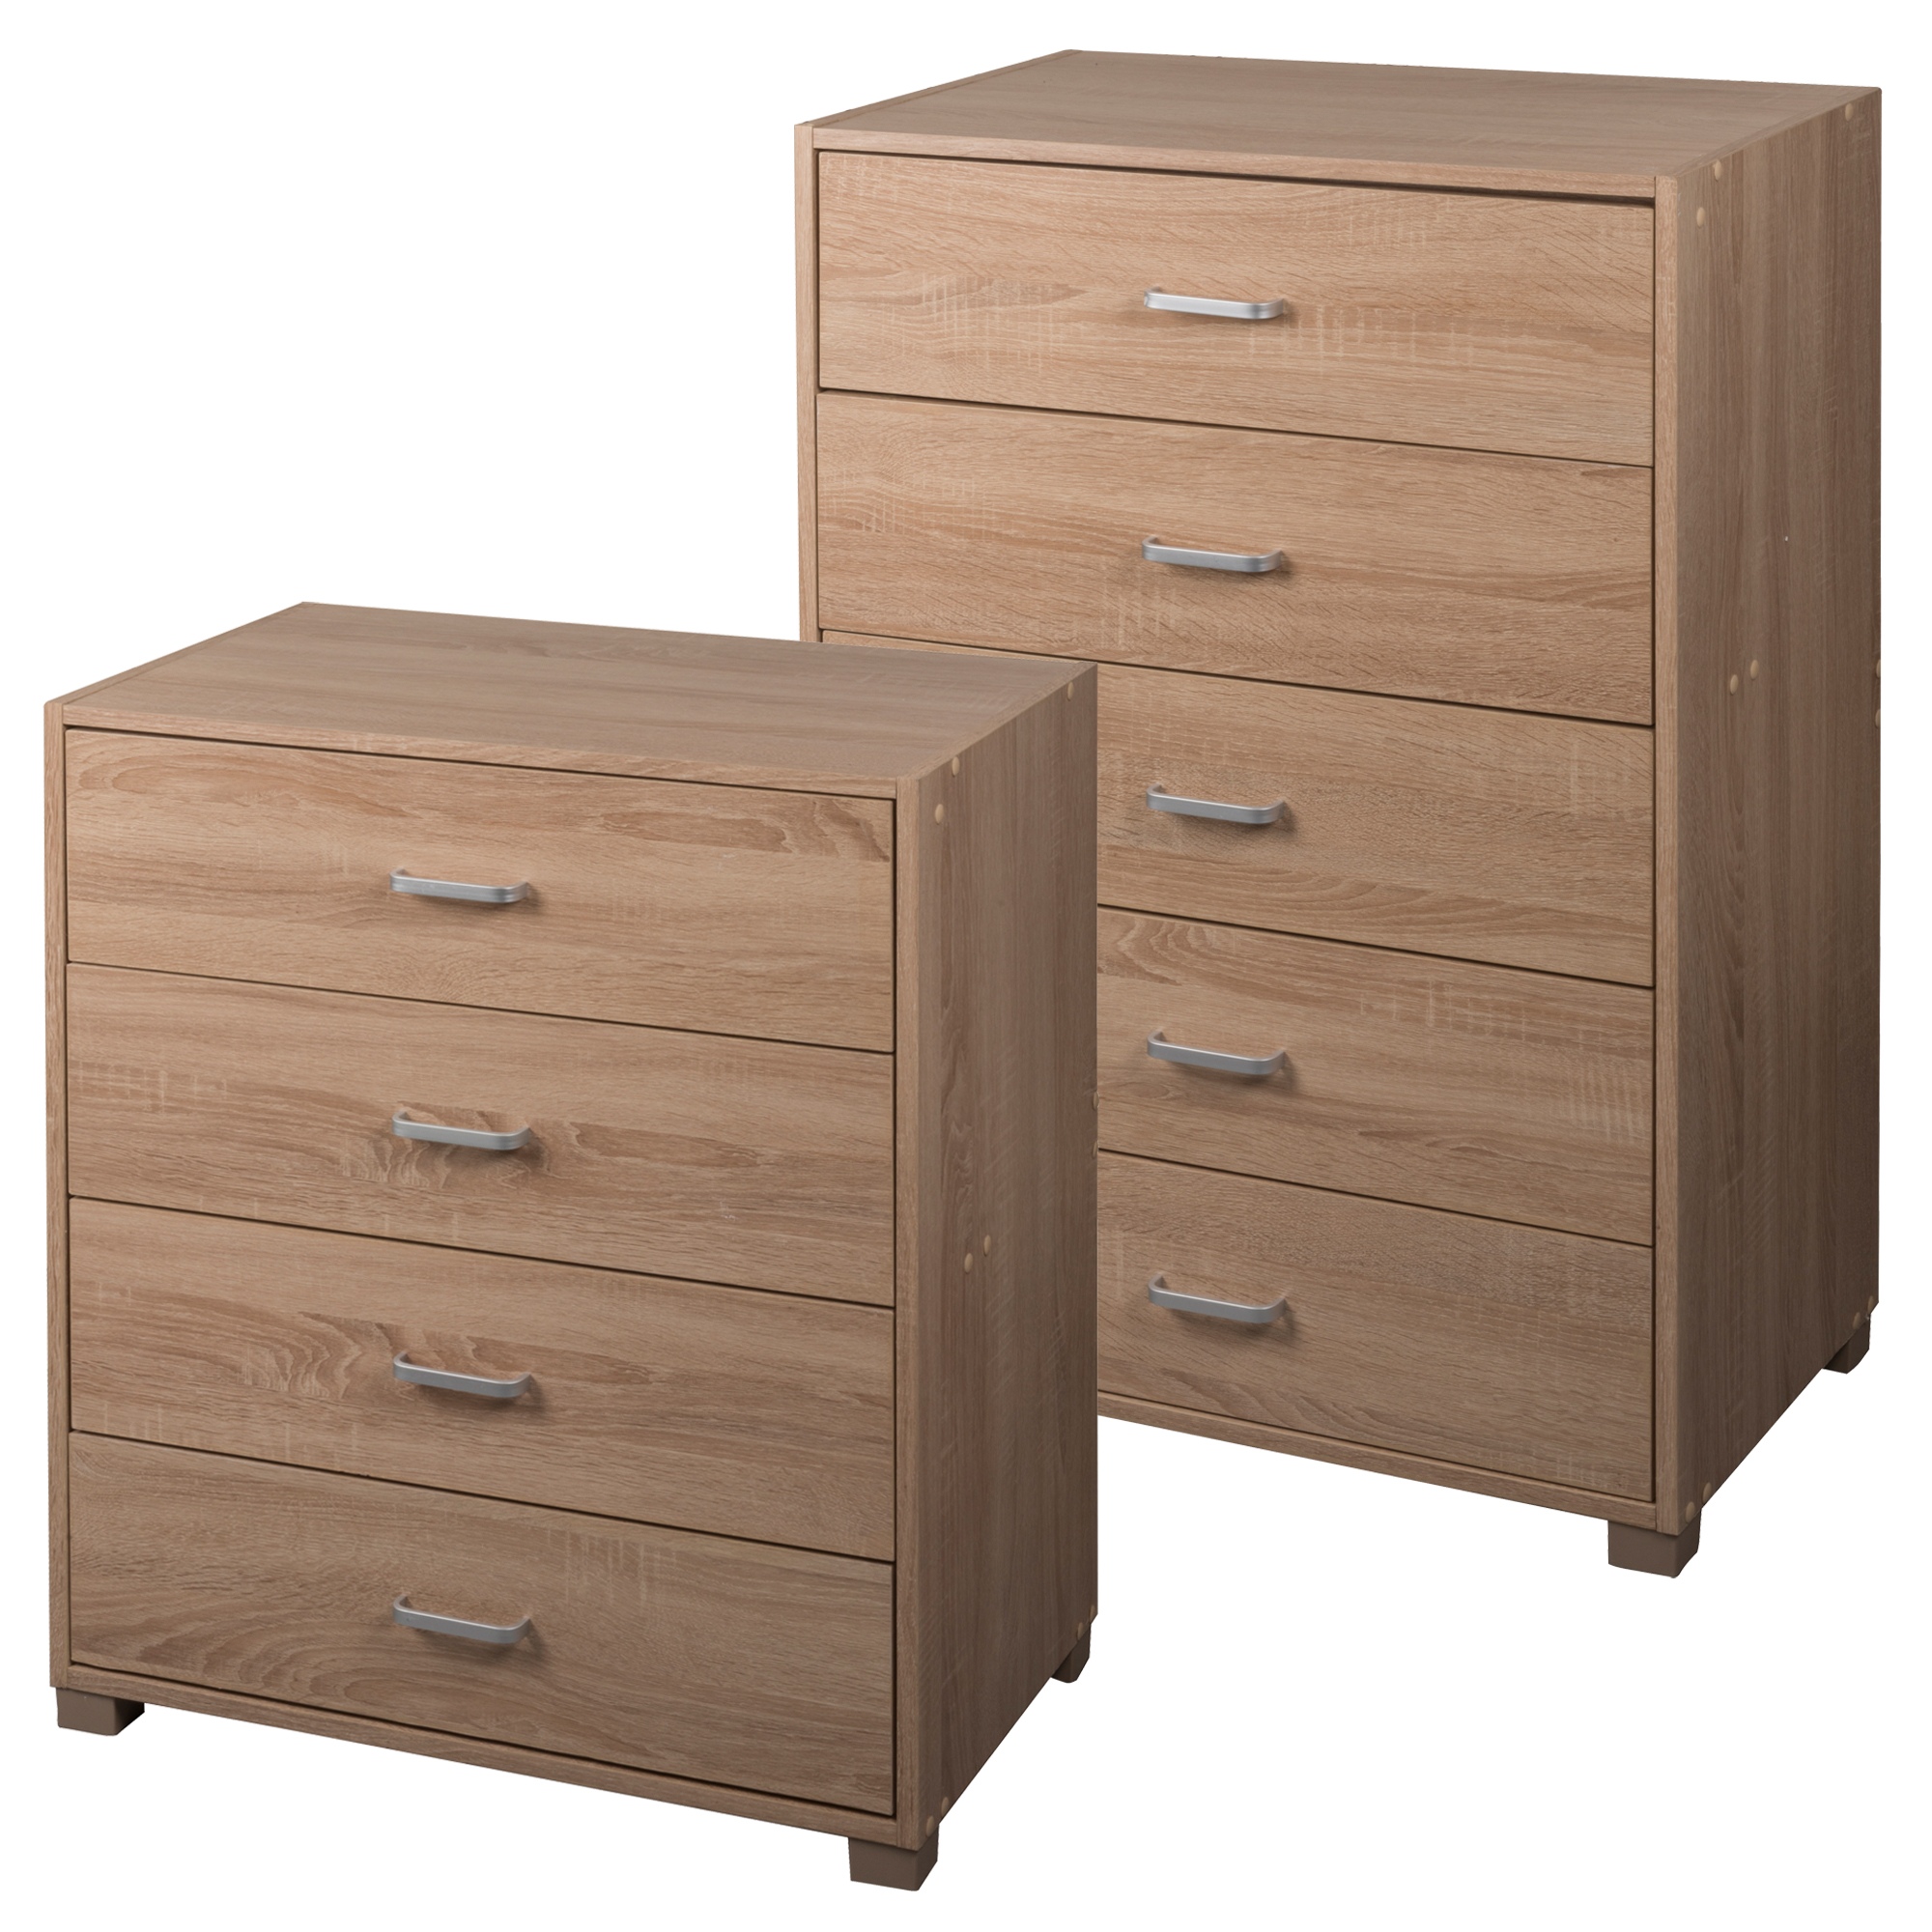 4 or 5 Drawer Oak Chest Of Drawers Wooden Bedroom Furniture Clothes